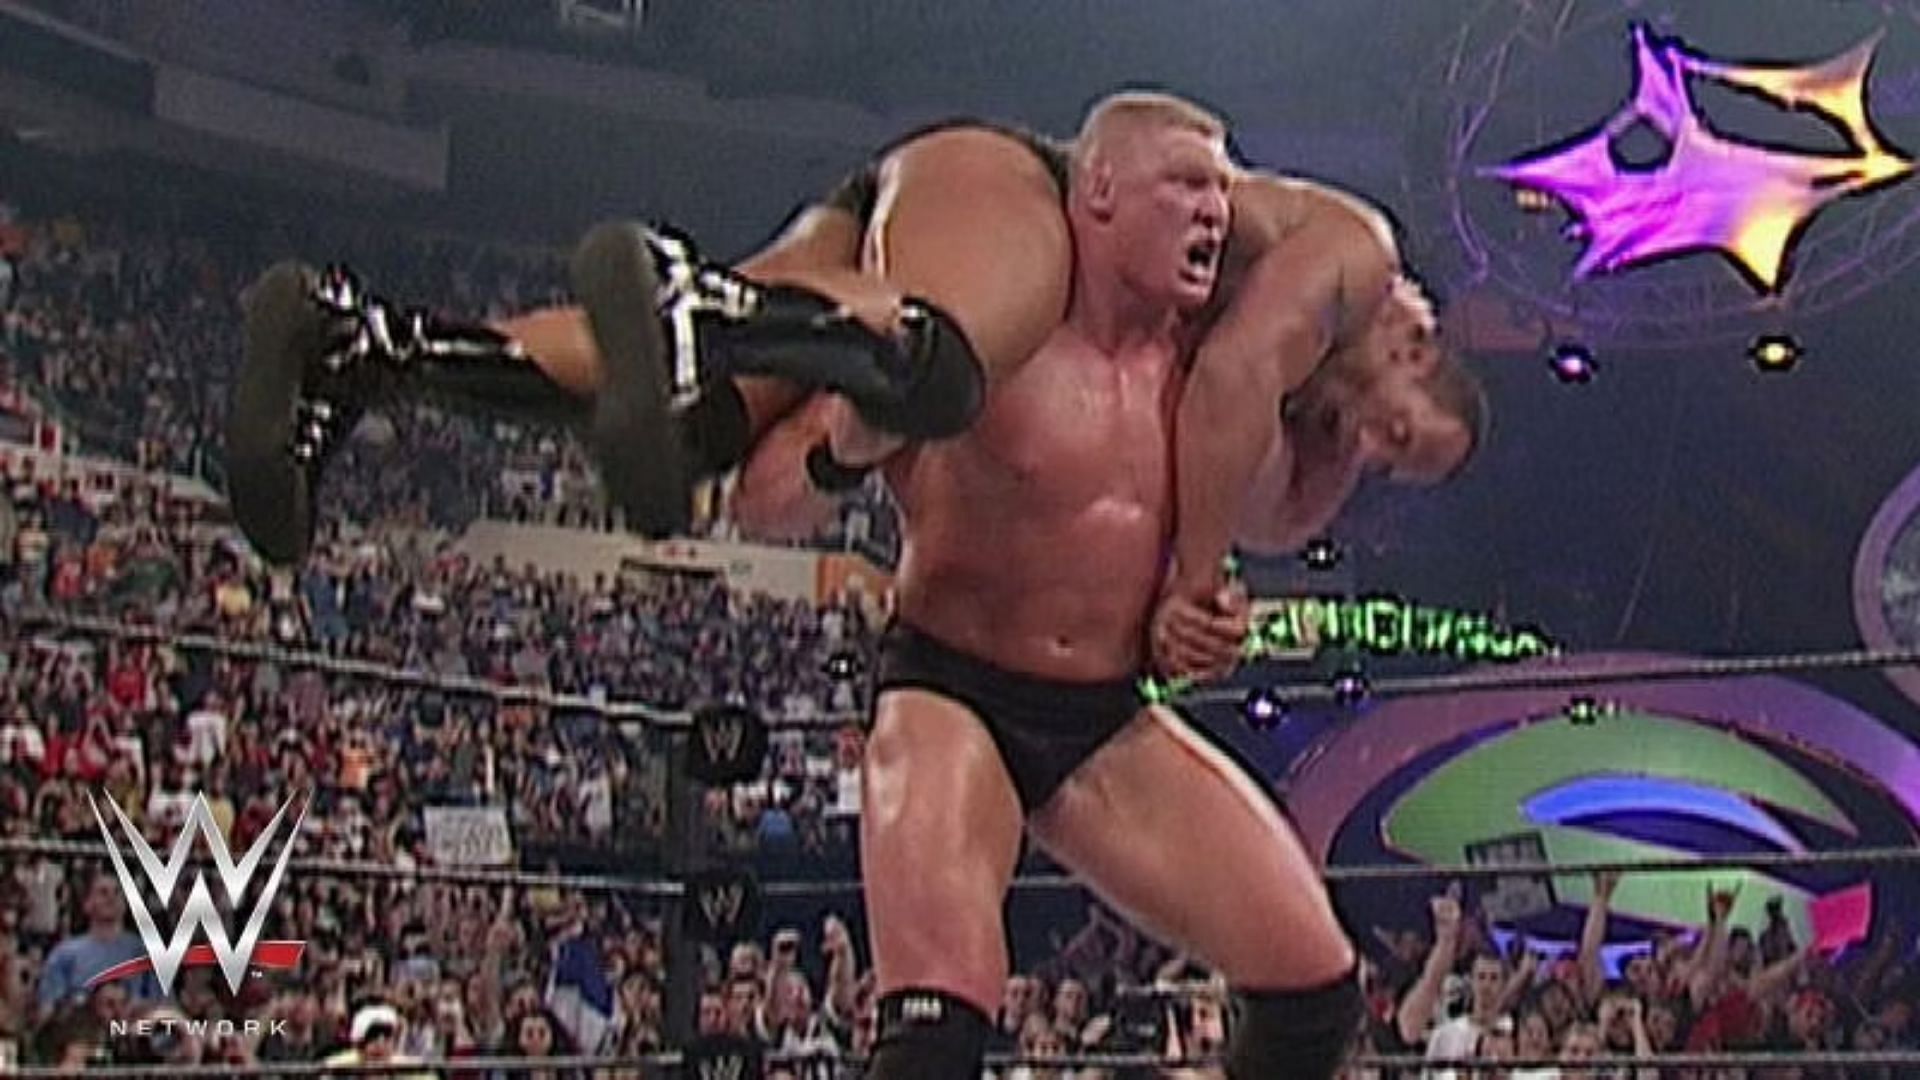 Lesnar won the WWE Championship from The Rock